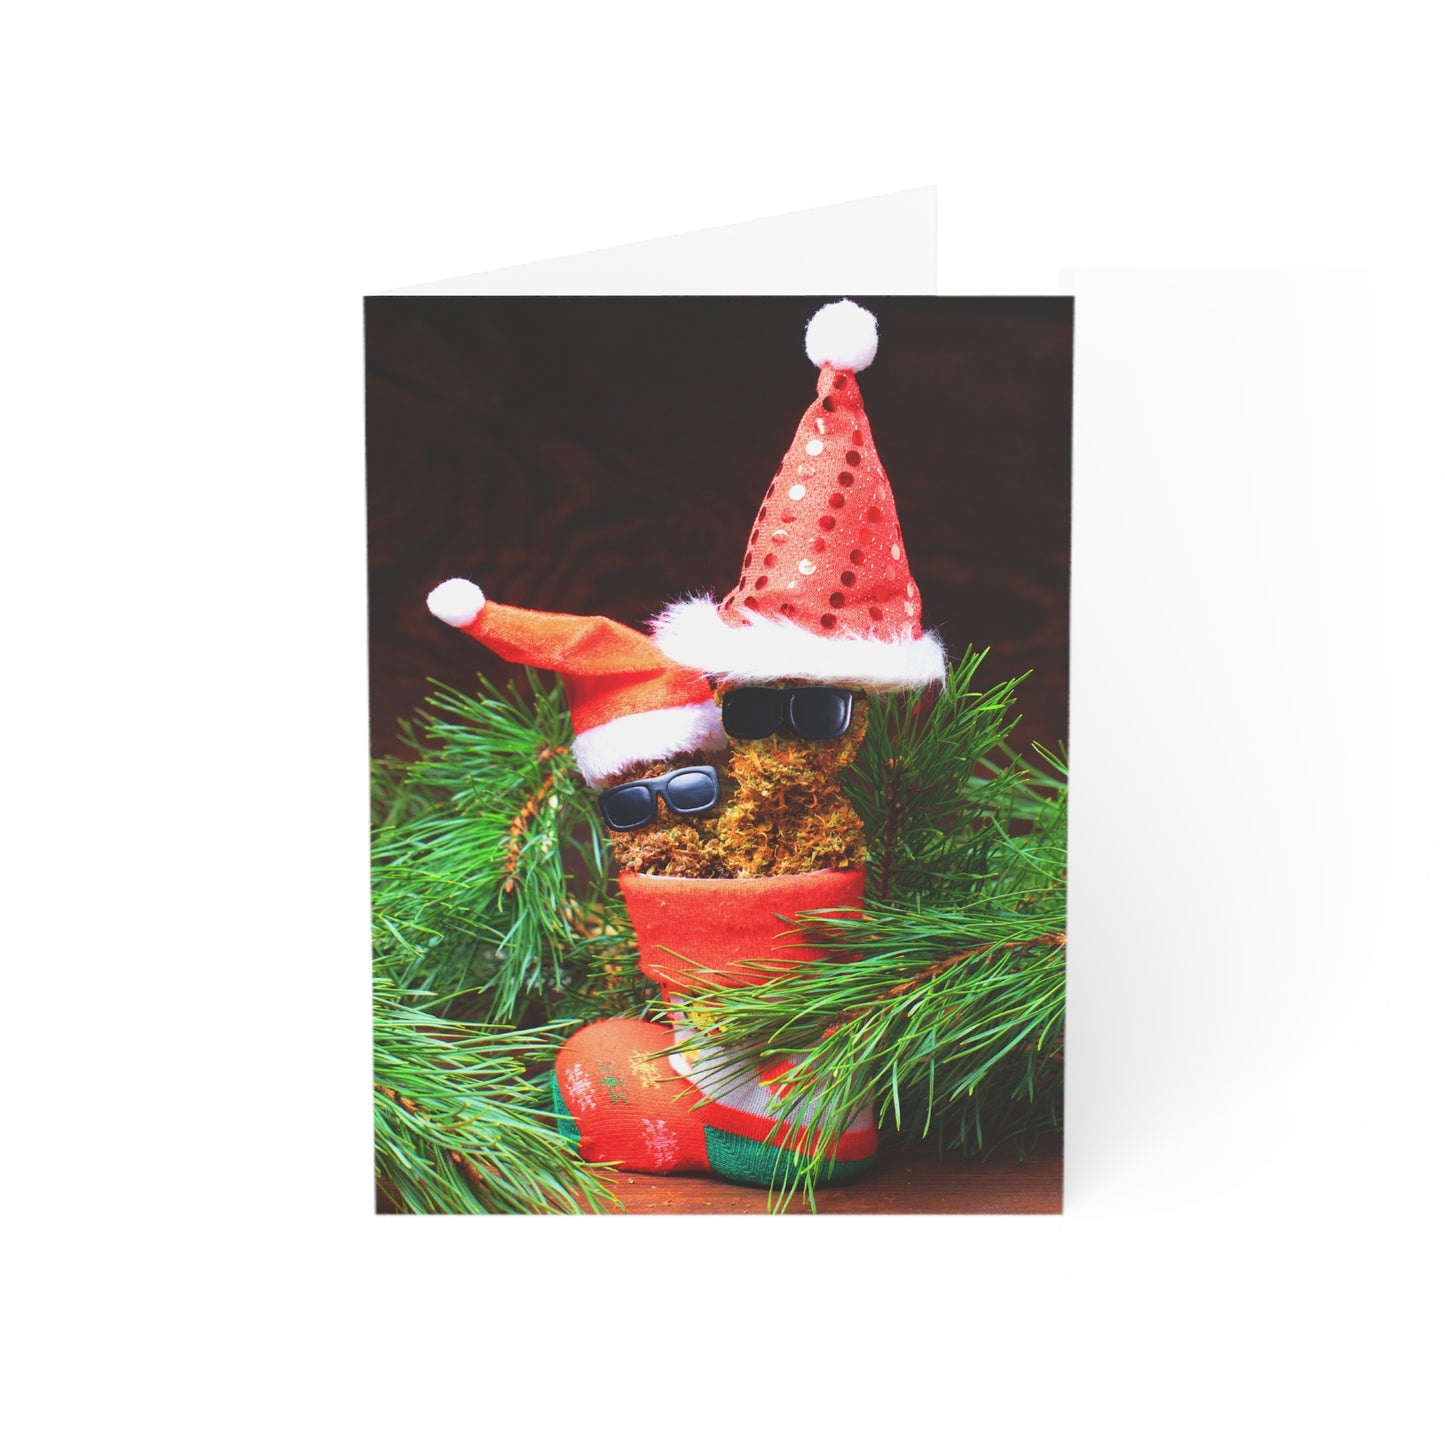 Merry Kushmas From Your Best Bud Christmas Greeting Cards (1, 10, 30, and 50pcs)